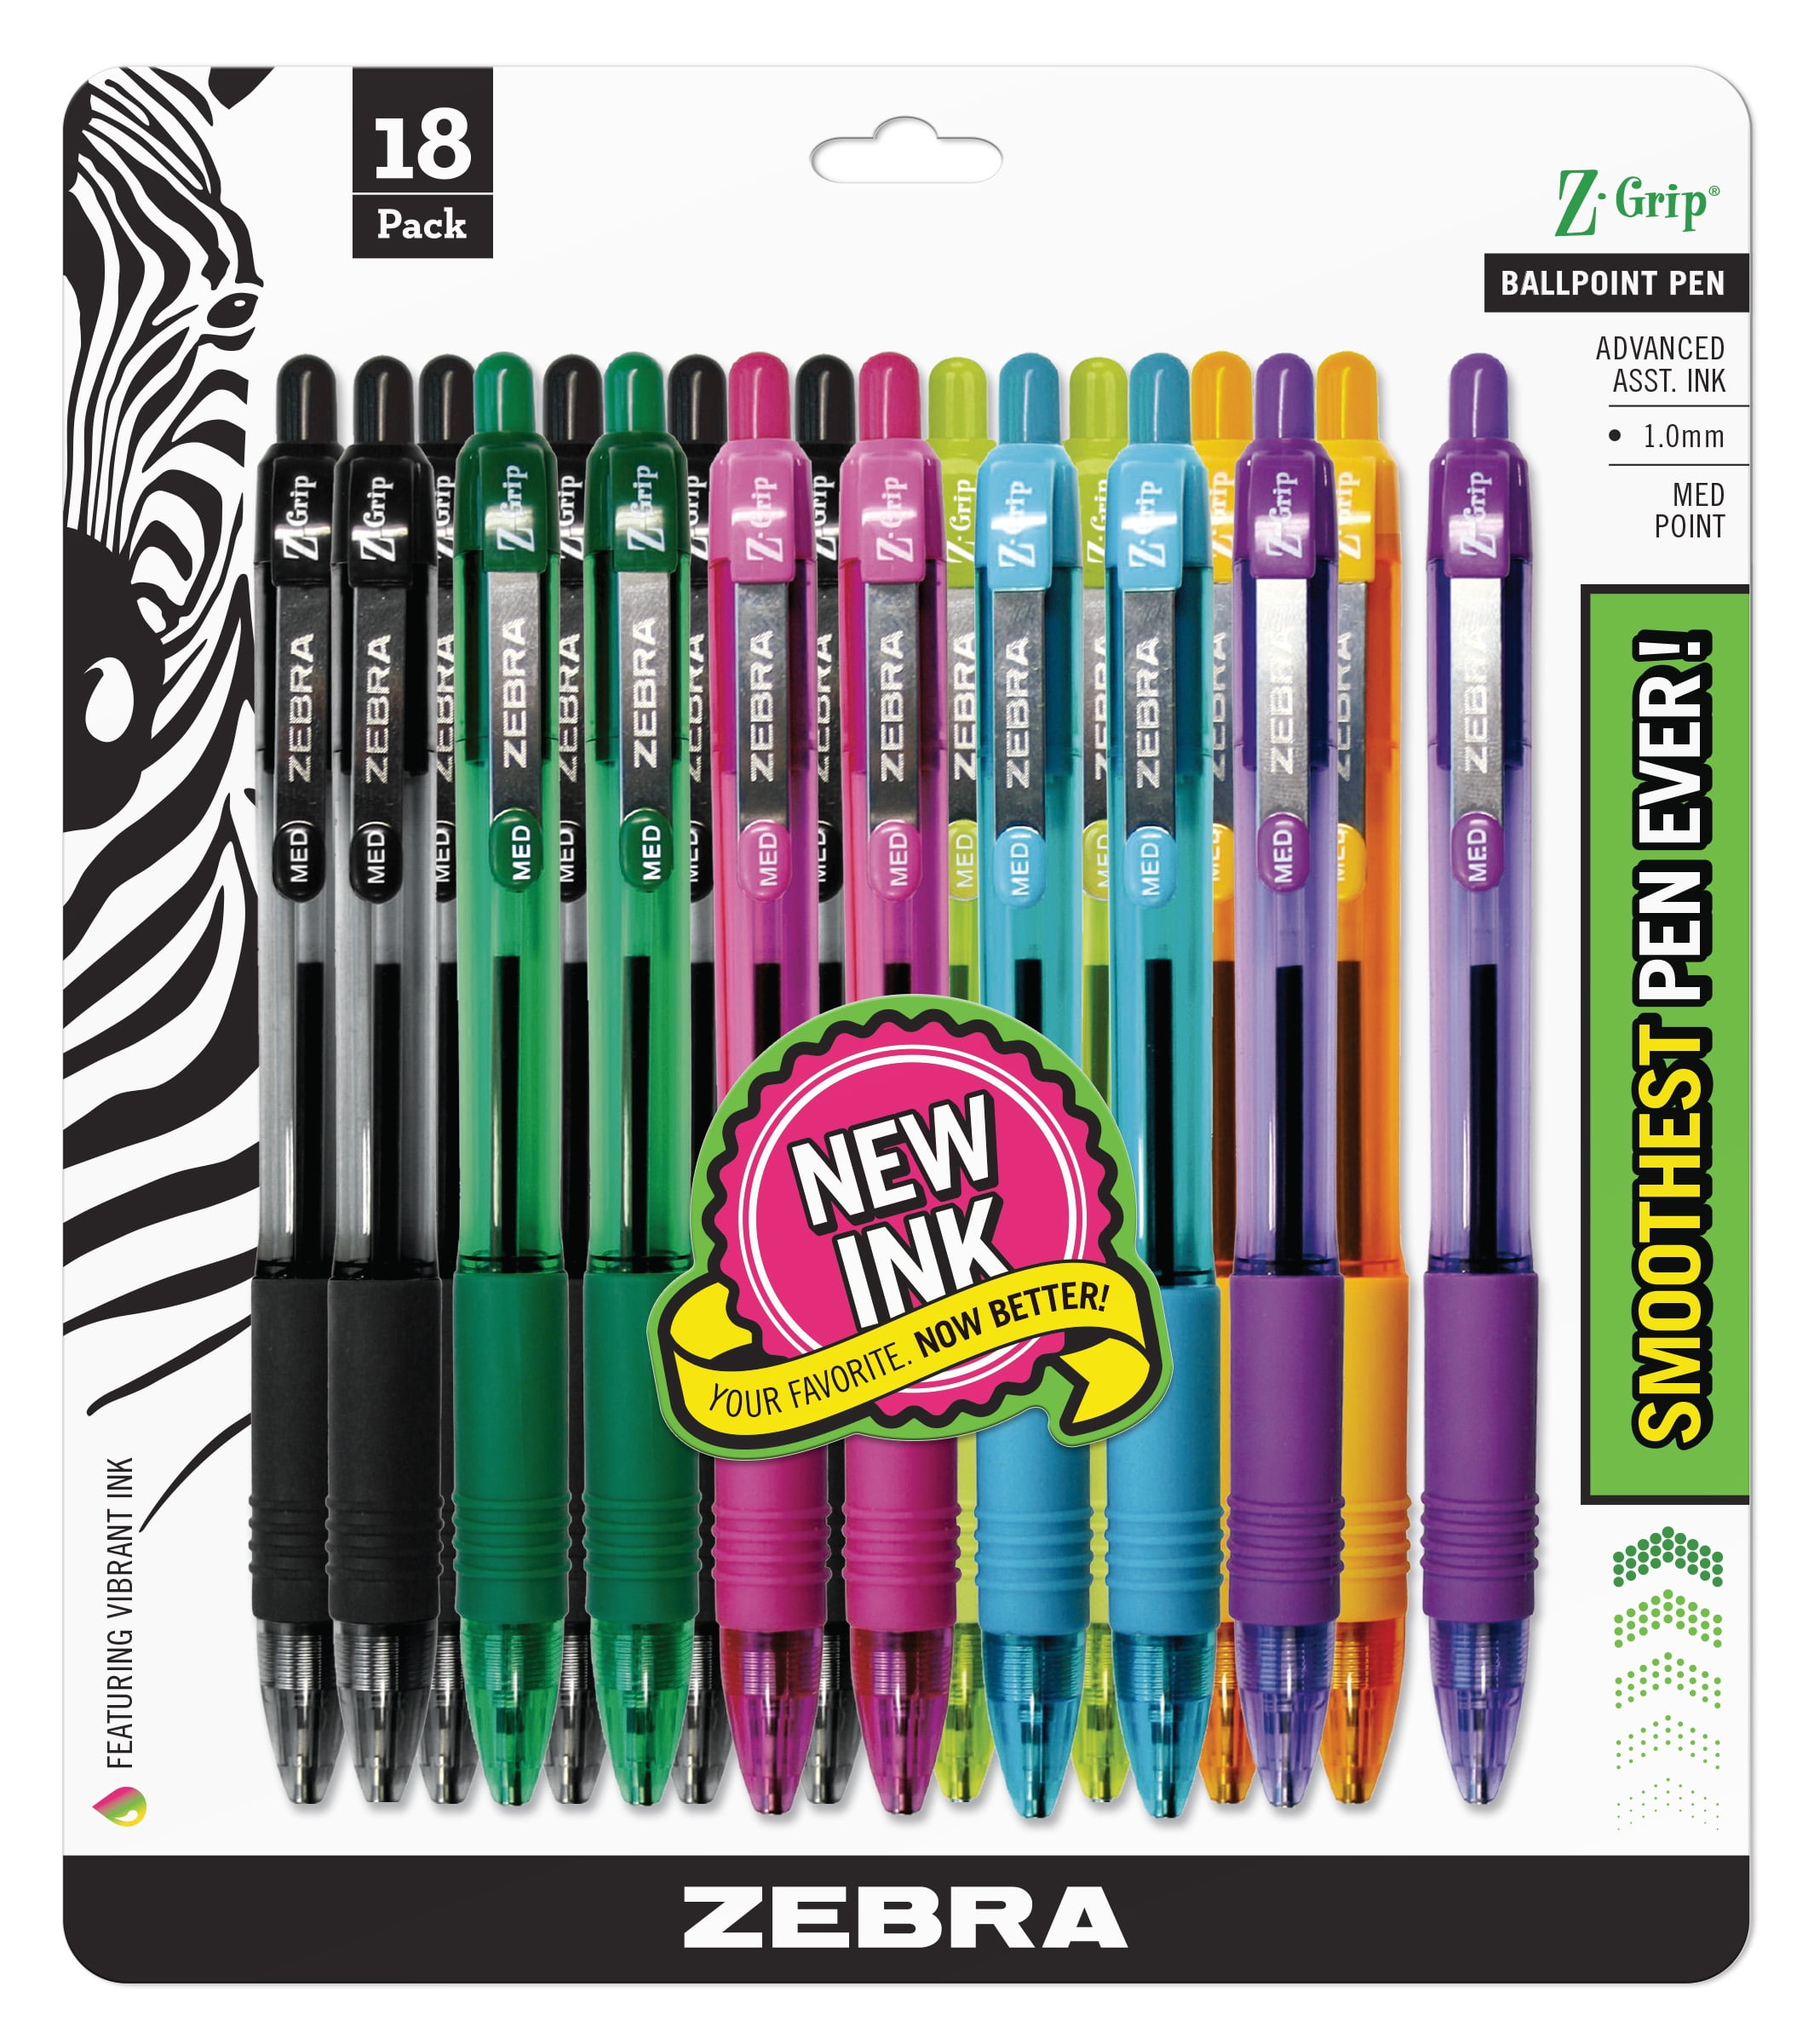 Beadable Pen Slim Ballpoint Pens Include 20 Bead Pens 40 Black Refills And  240 Bright Spacer Beads For Students Office